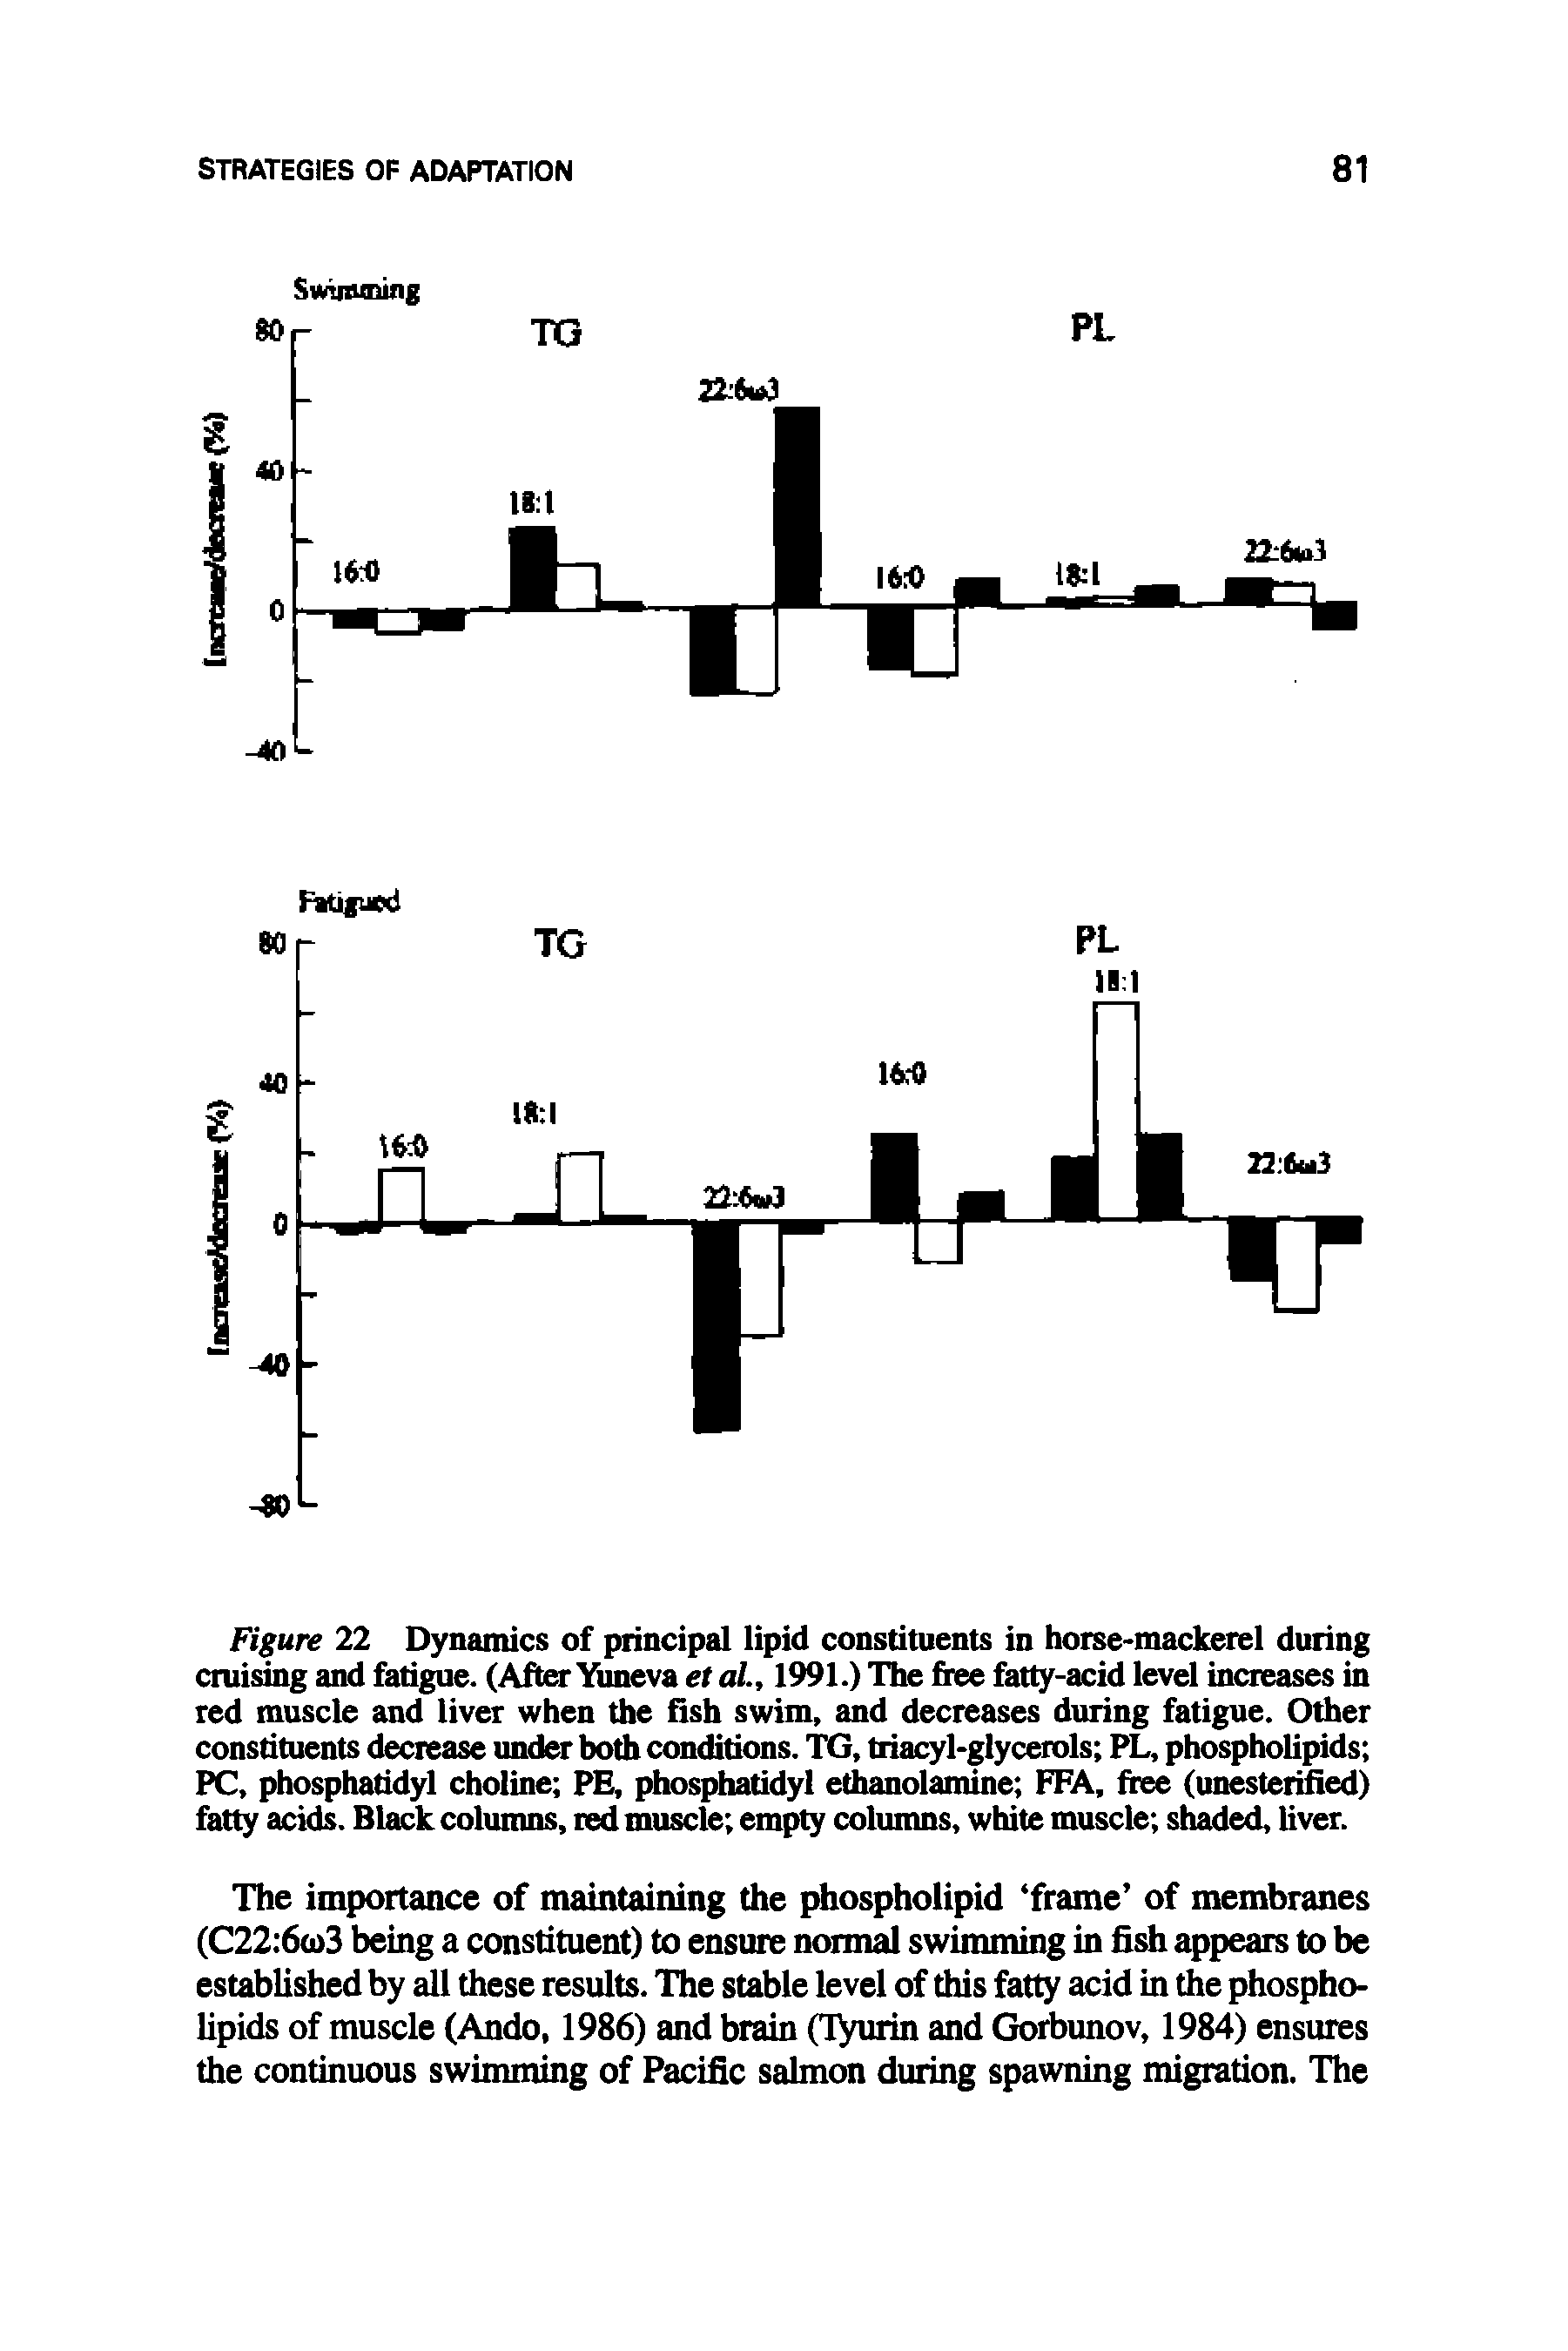 Figure 22 Dynamics of principal lipid constituents in horse-mackerel during cruising and fatigue. (After Yuneva et al., 1991.) The free fatty-acid level increases in red muscle and liver when the fish swim, and decreases during fatigue. Other constituents decrease under both conditions. TG, triacyl-glycerols PL, phospholipids PC, phosphatidyl choline PE, phosphatidyl ethanolamine FFA, free (unesterified) fatty acids. Black columns, red muscle empty columns, white muscle shaded, liver.